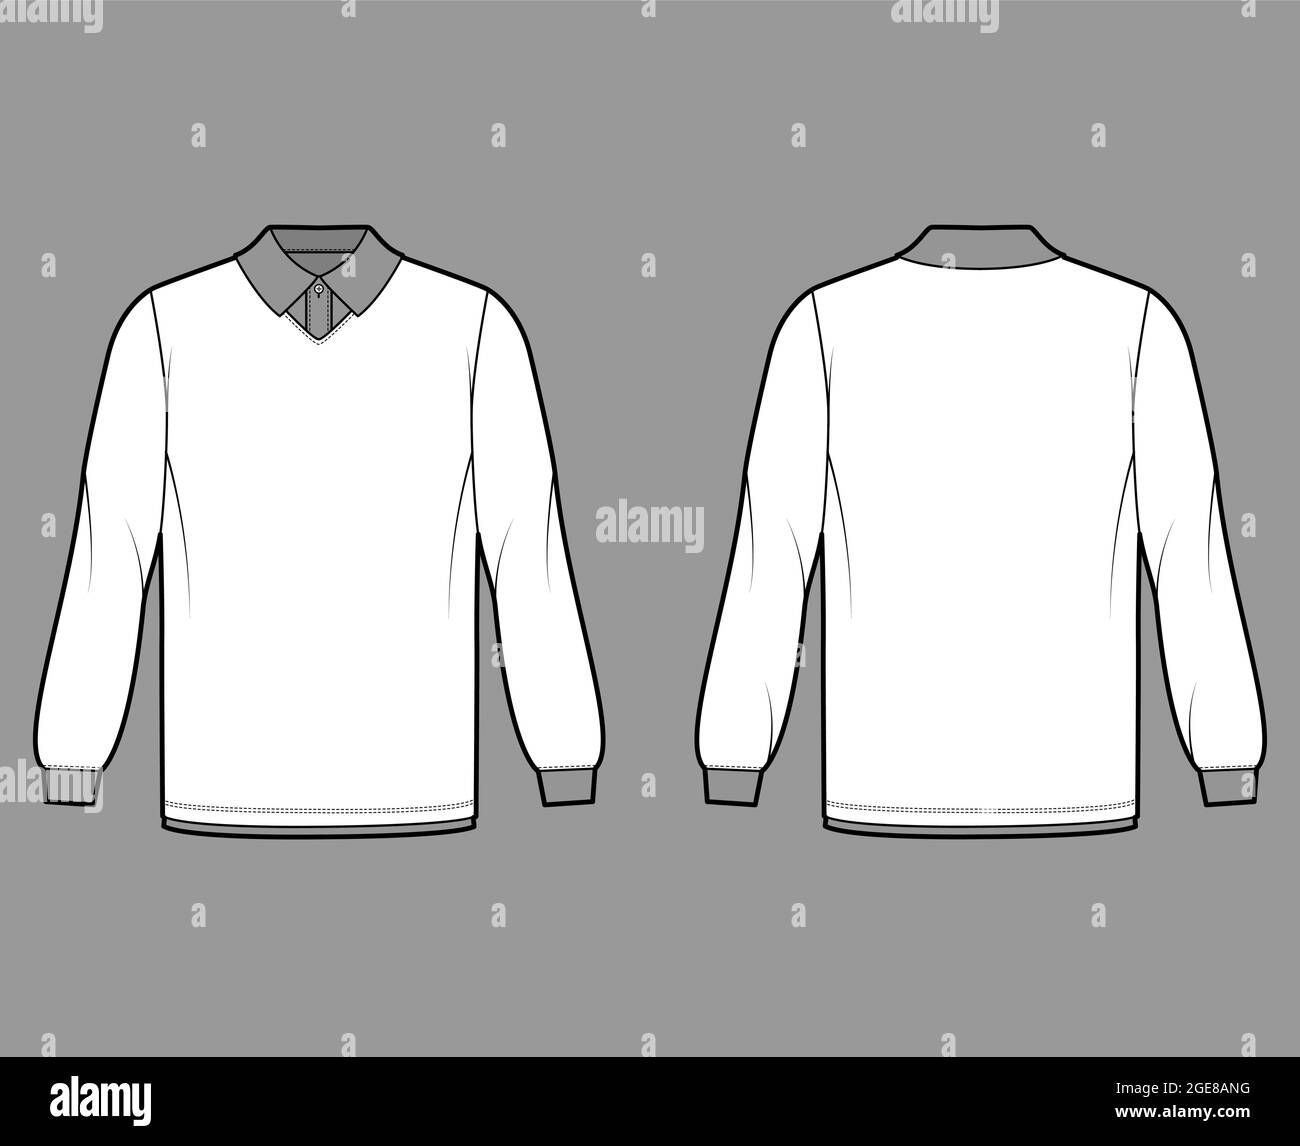 Shirt double technical fashion illustration with long sleeves, tunic length, henley neck, oversized, flat classic collar. Apparel top outwear template front, back, white color. Women men CAD mockup Stock Vector